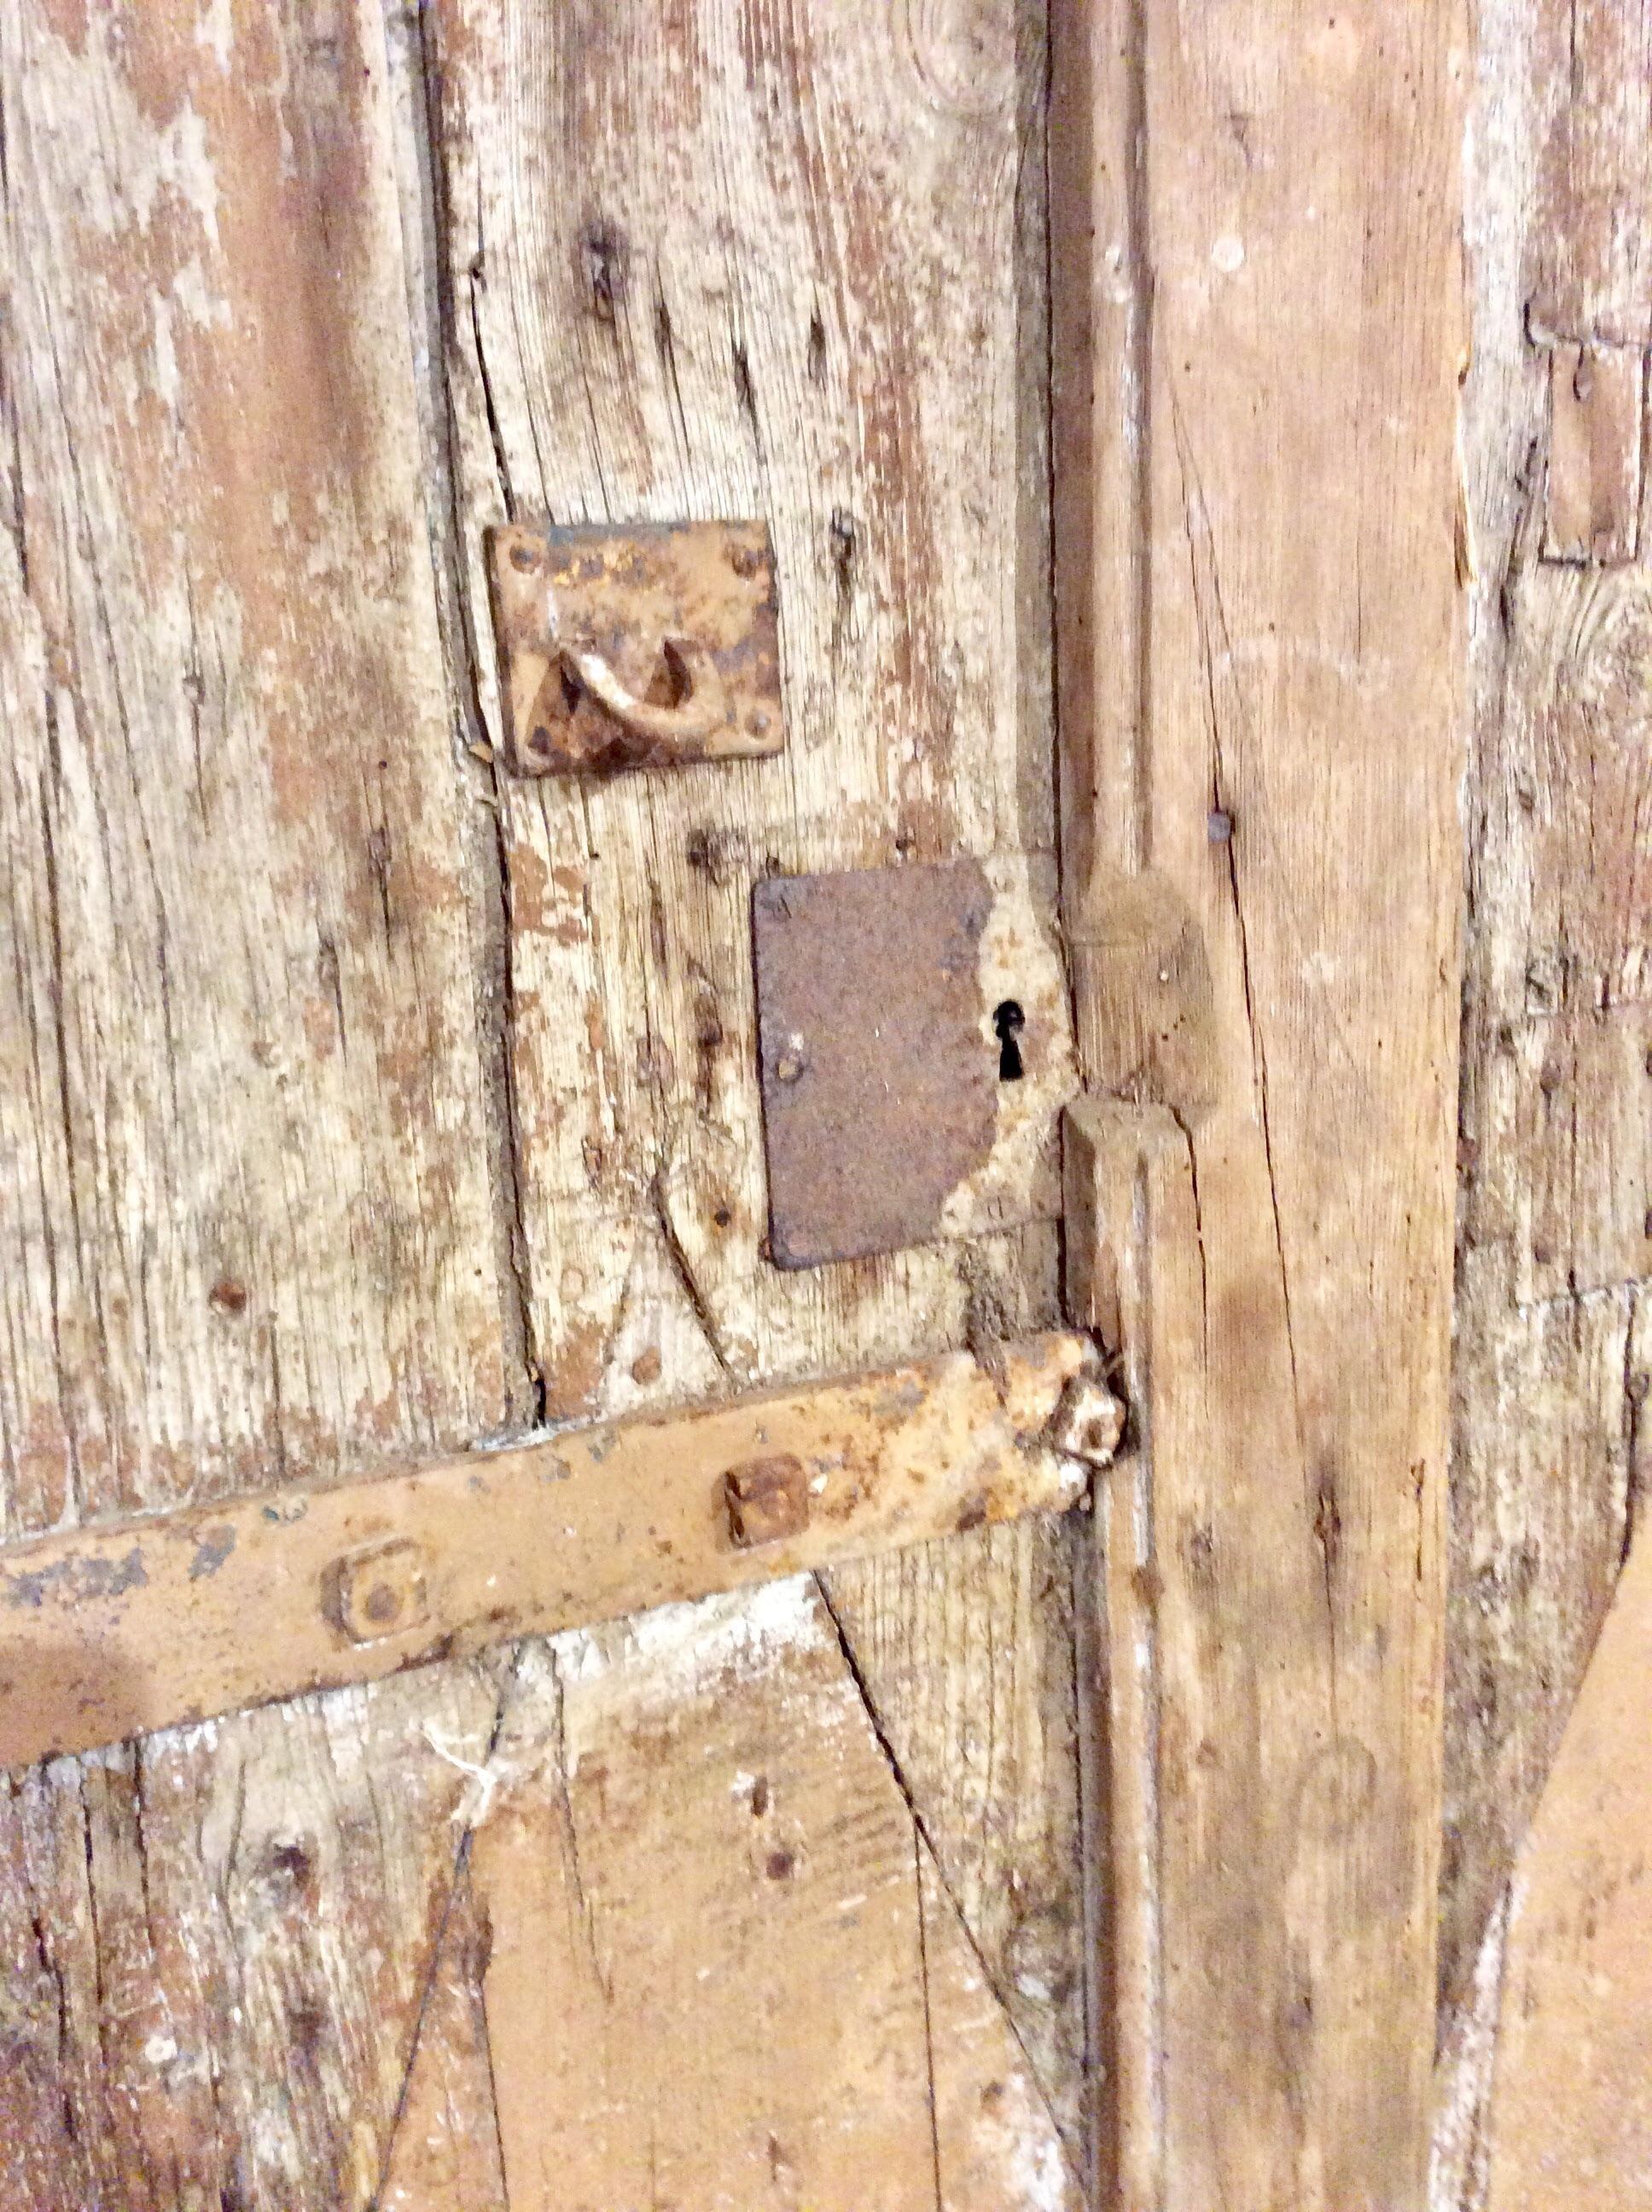 Hand-Crafted Early 1800s French Architectural Arched Wood Doors With Original Iron Hardware